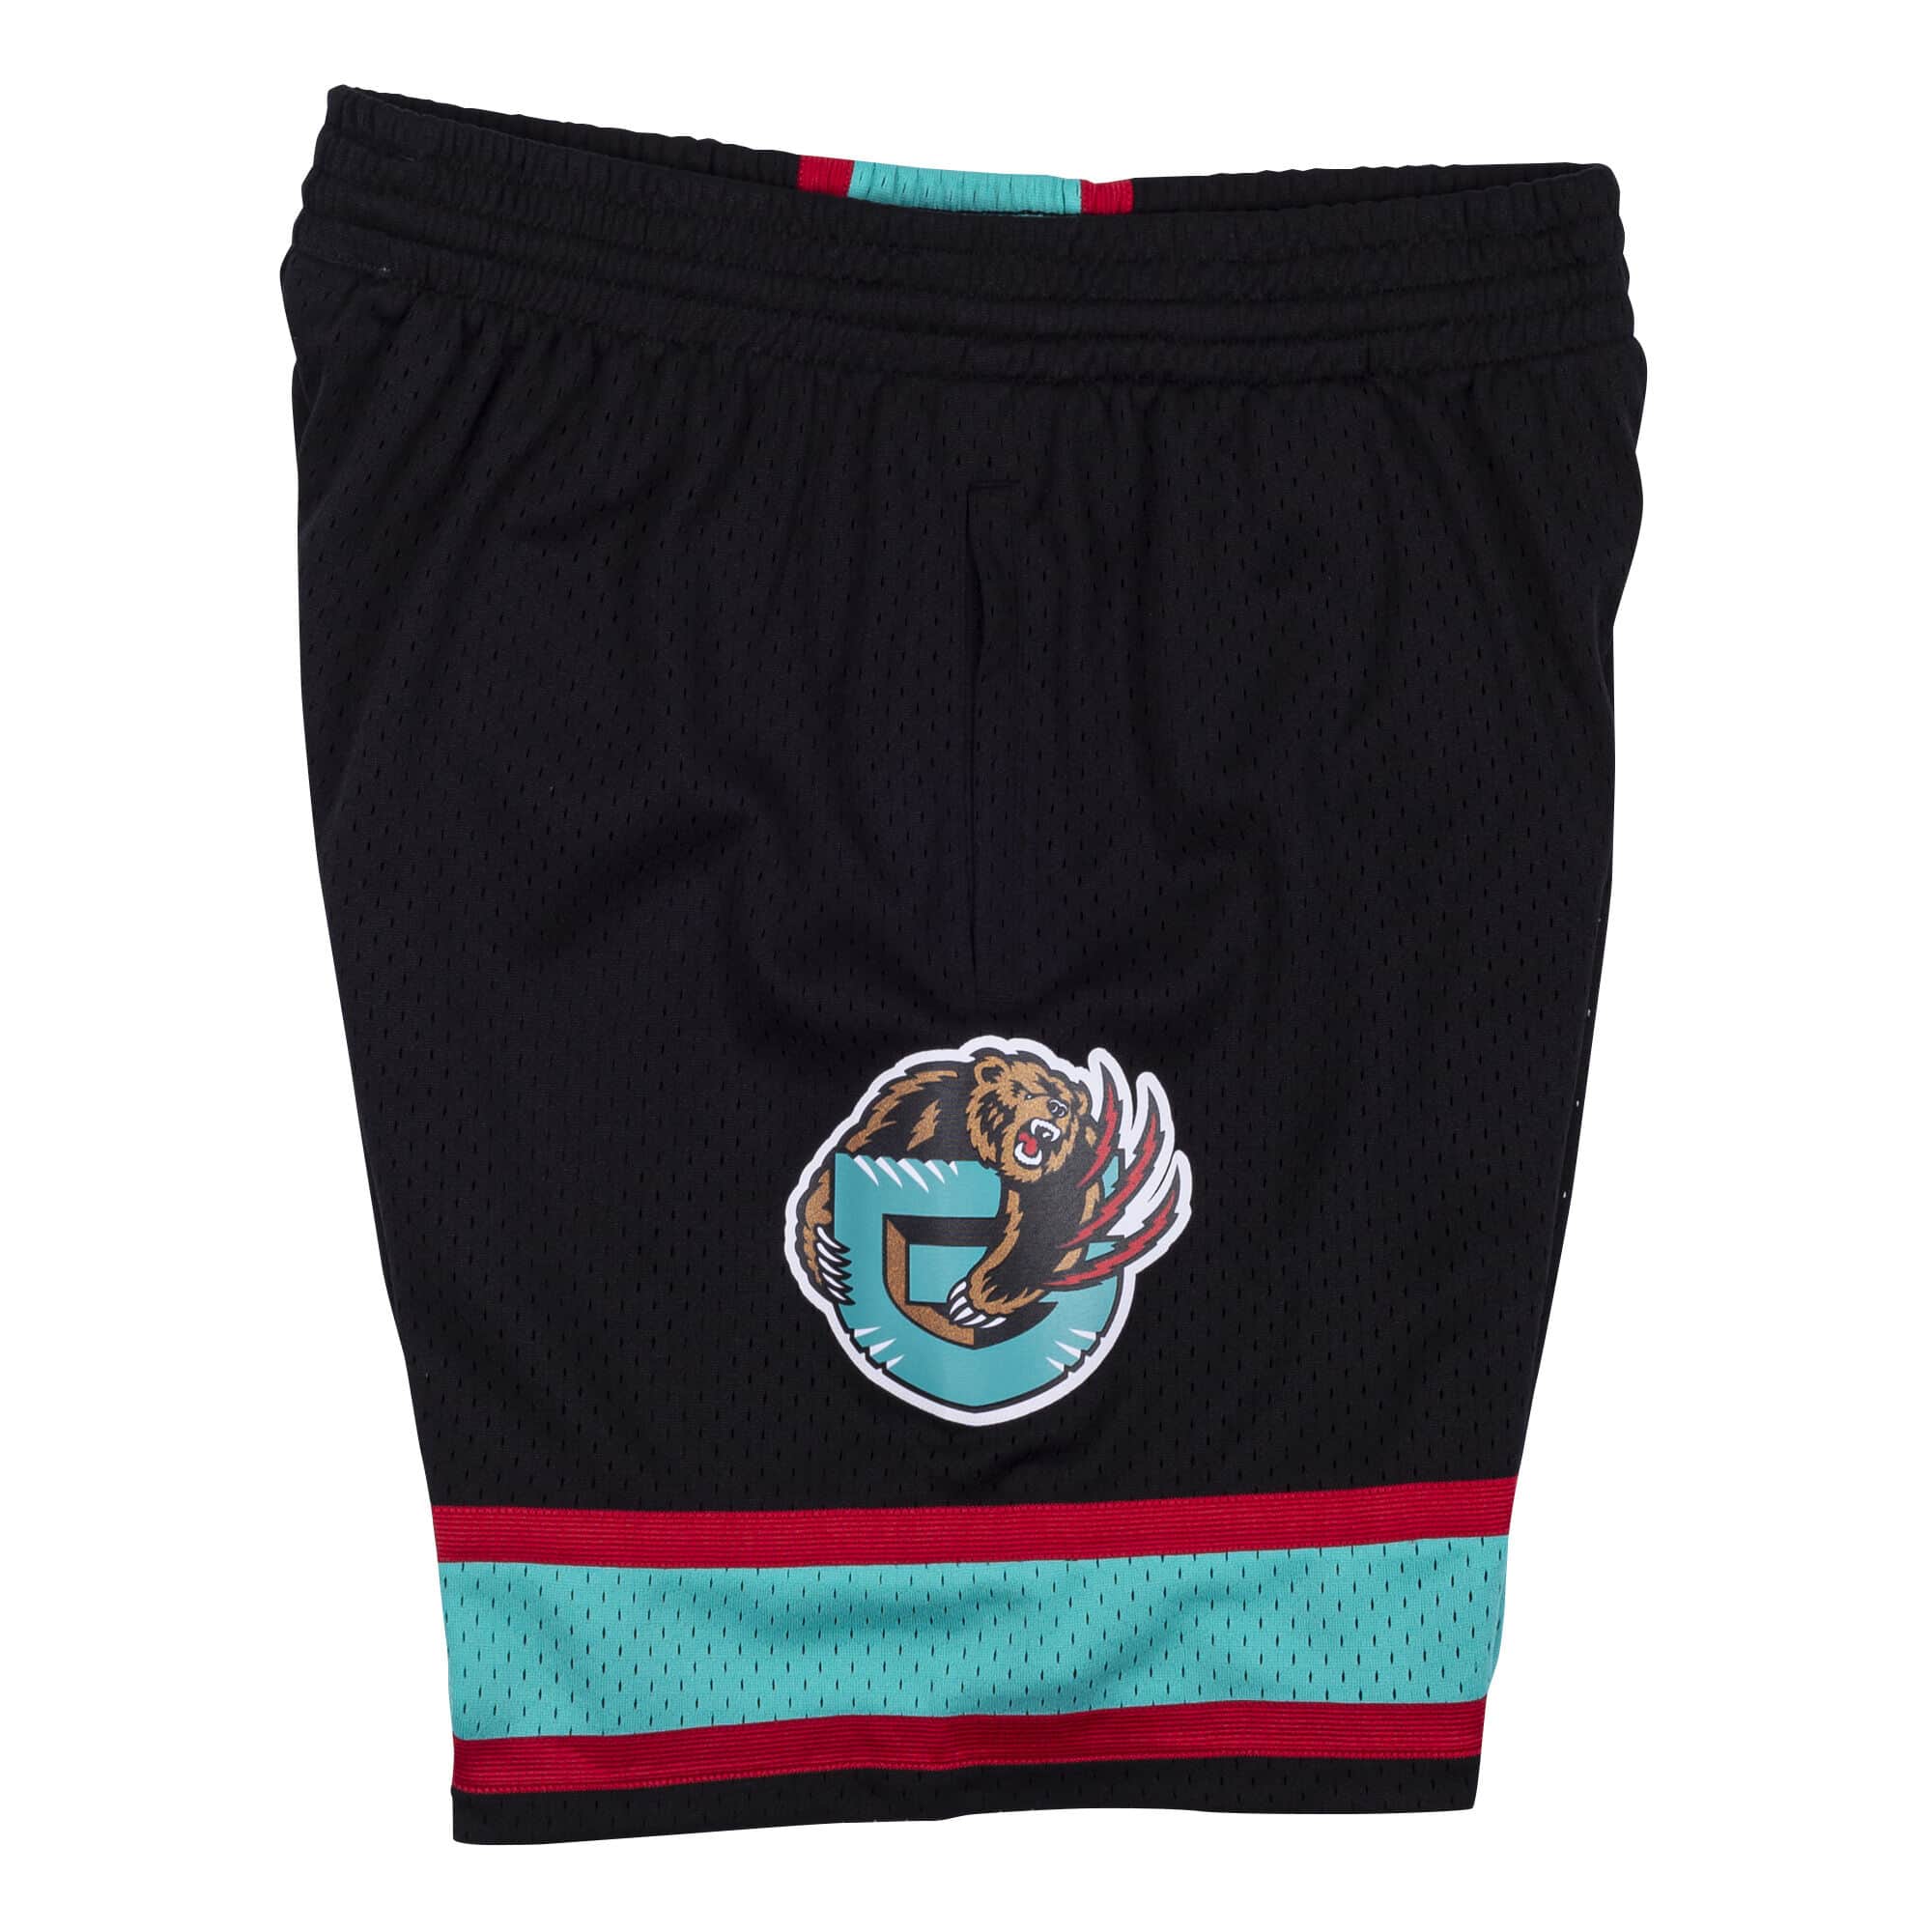 Mitchell & Ness Mens NBA Vancouver Grizzlies Reload 2.0 Swingman Short  SMSHGS20125-VGRRED198 Red